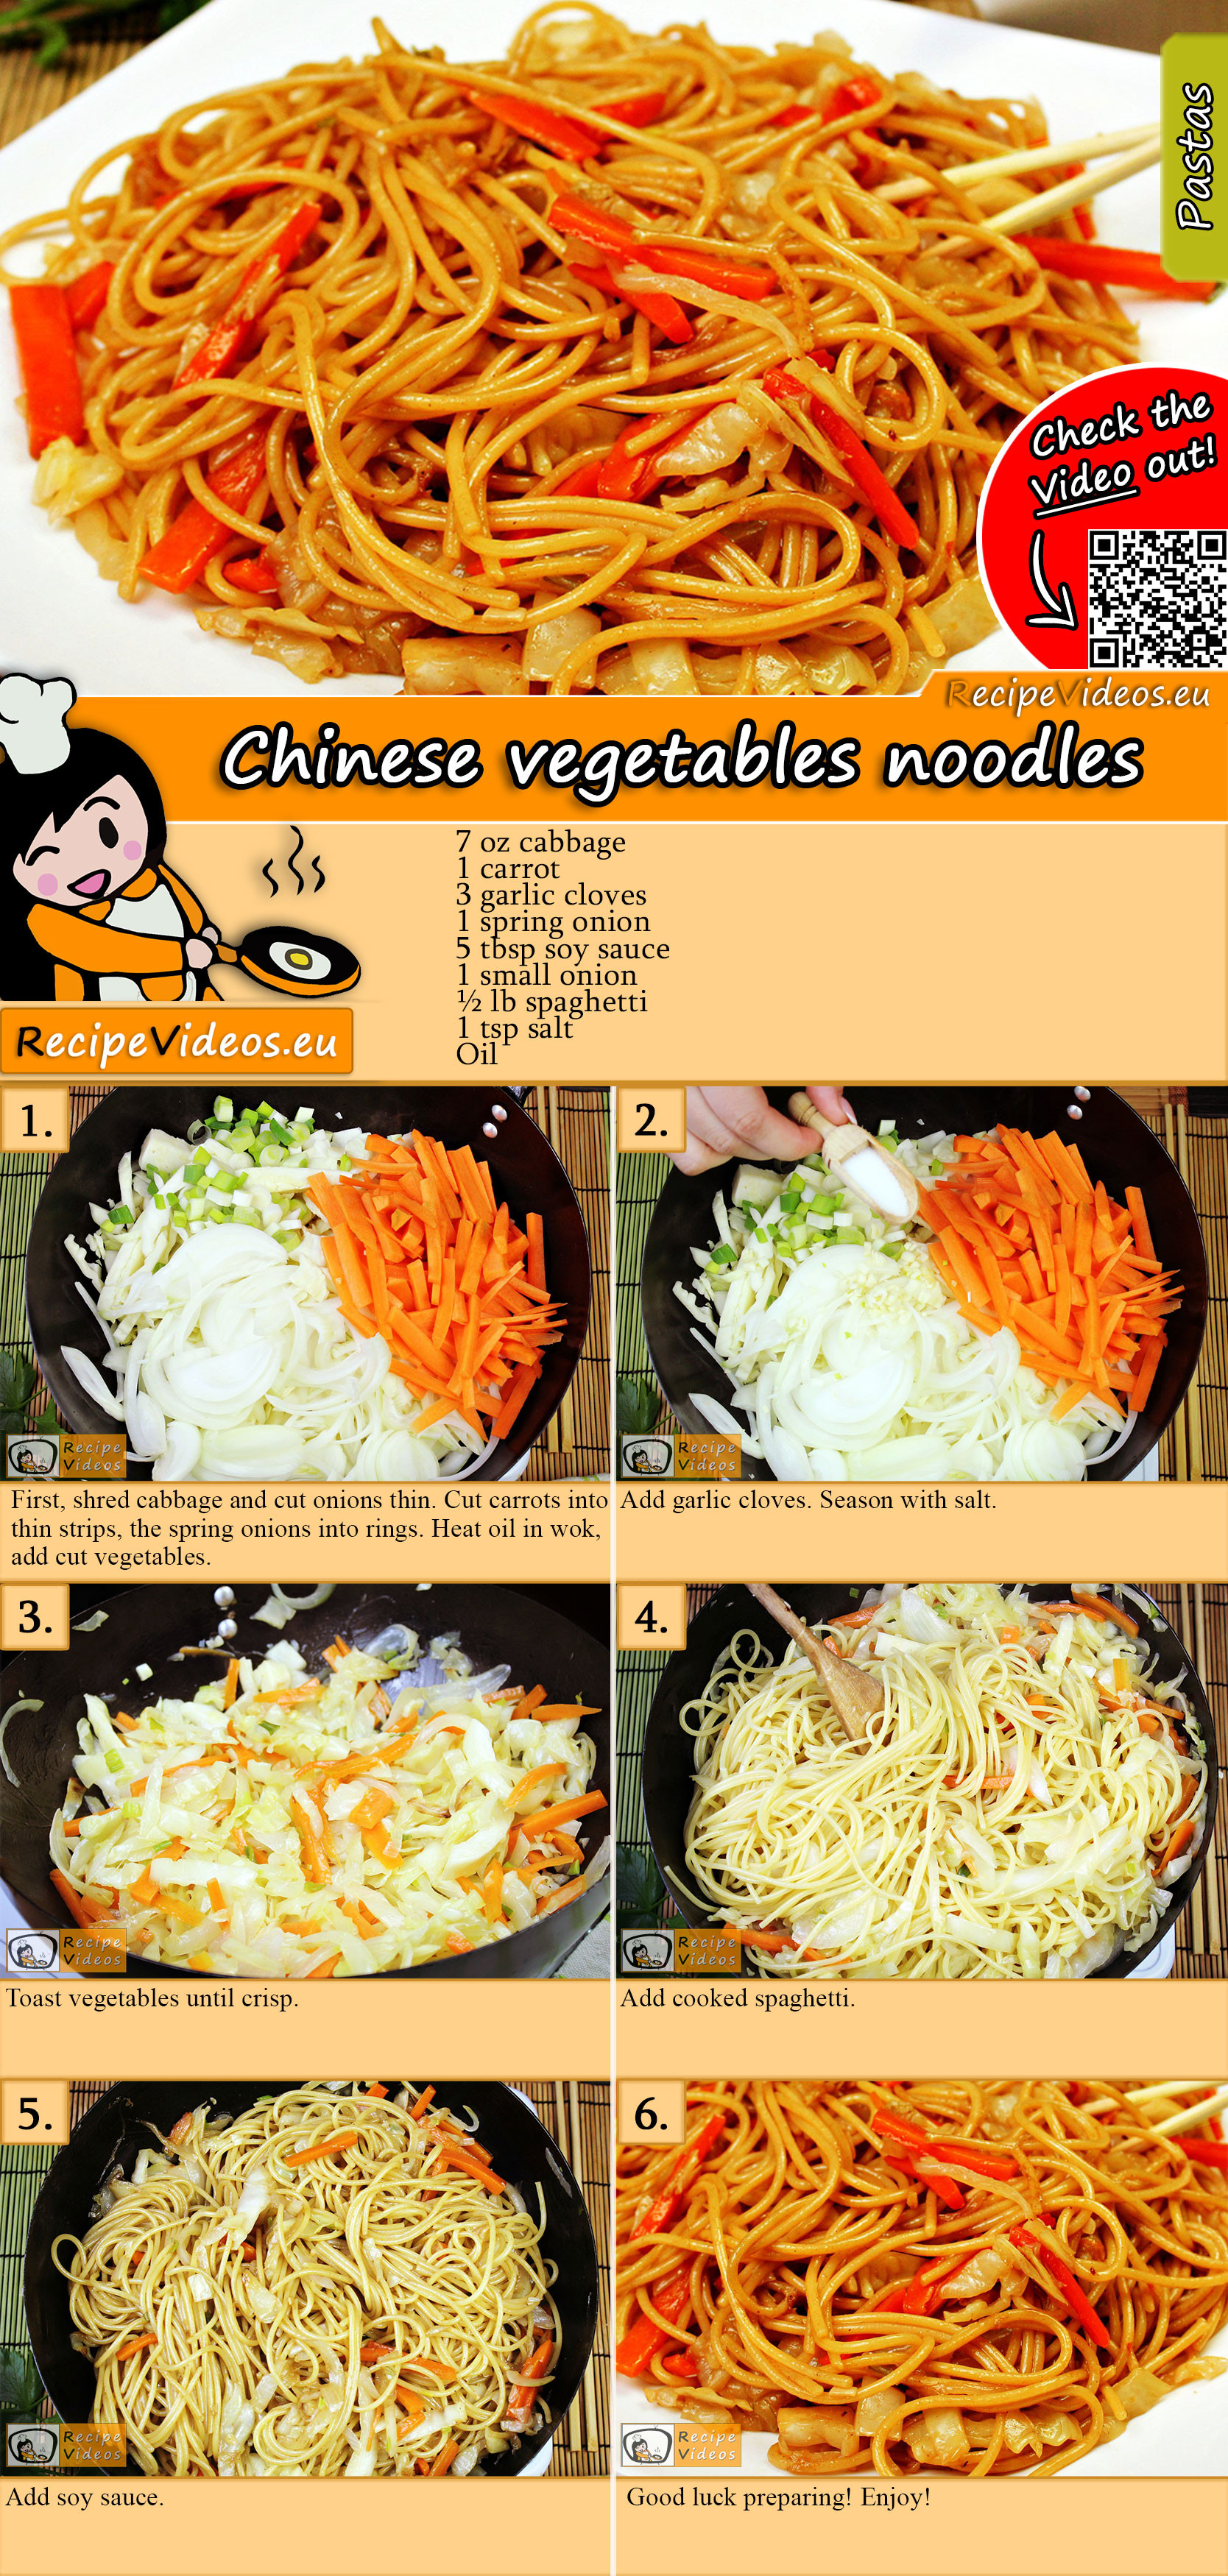 Chinese vegetables noodles recipe with video